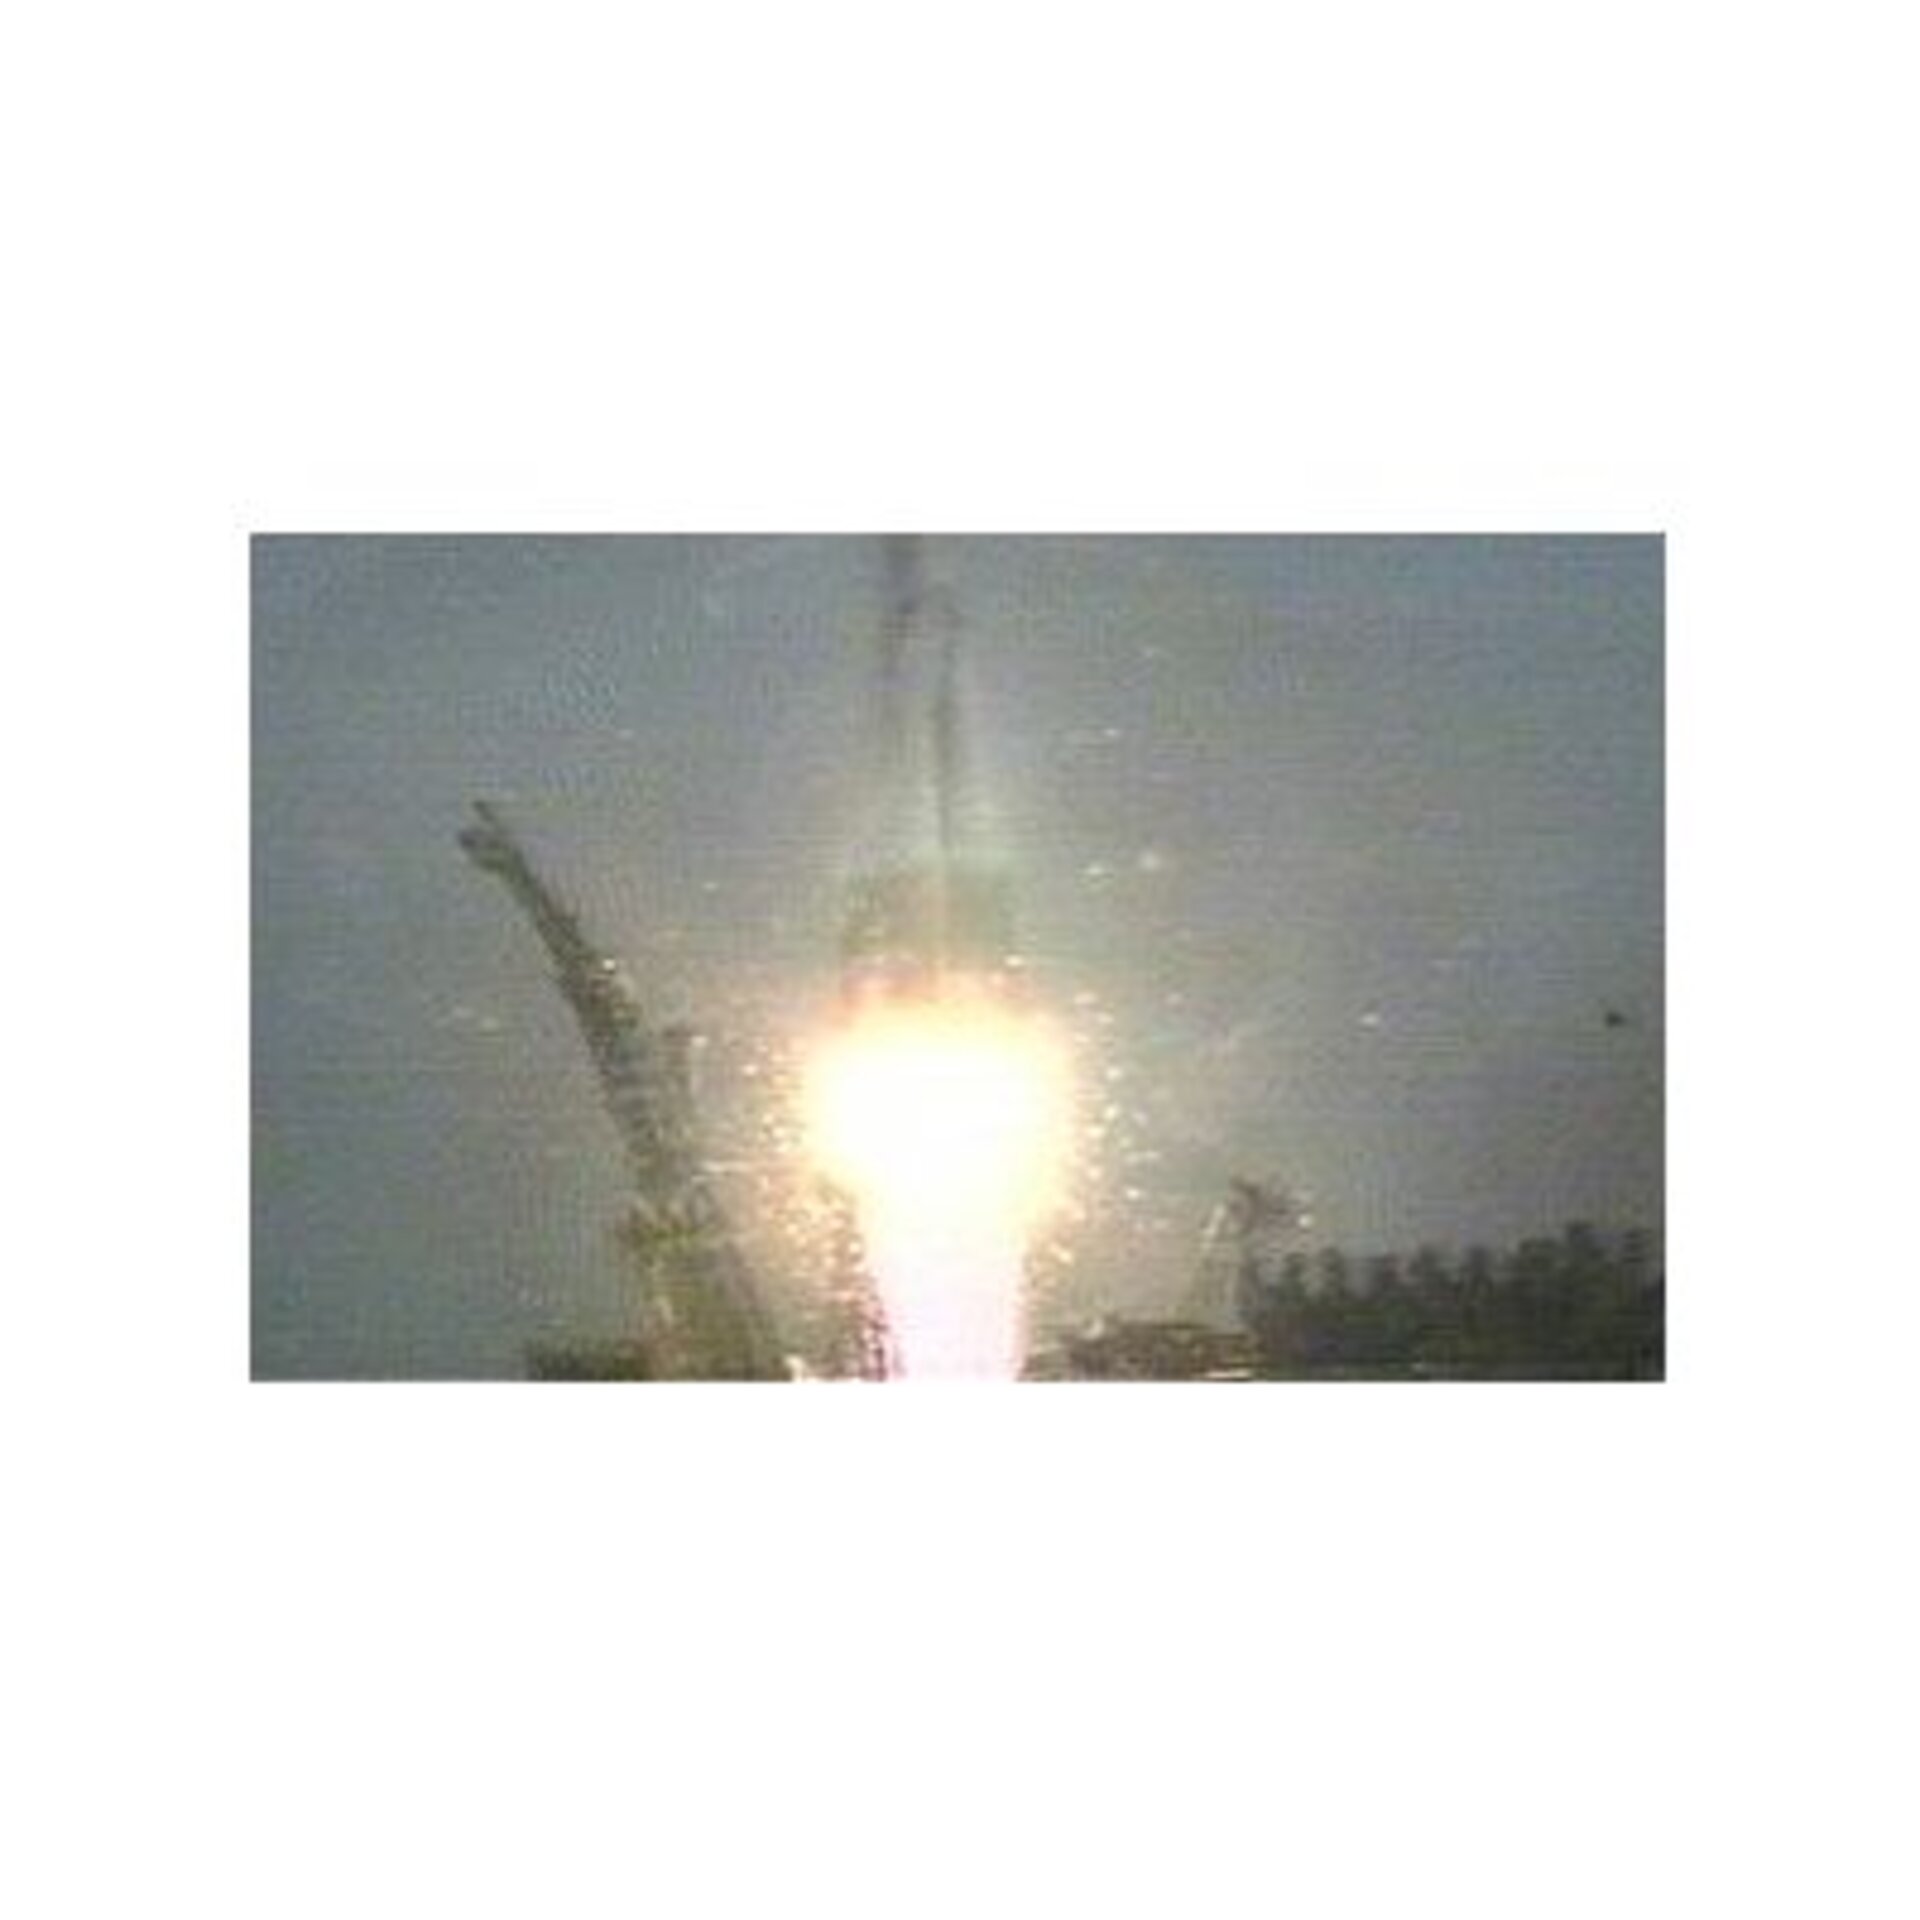 Launch Soyuz rocket with Expedition one crew to ISS